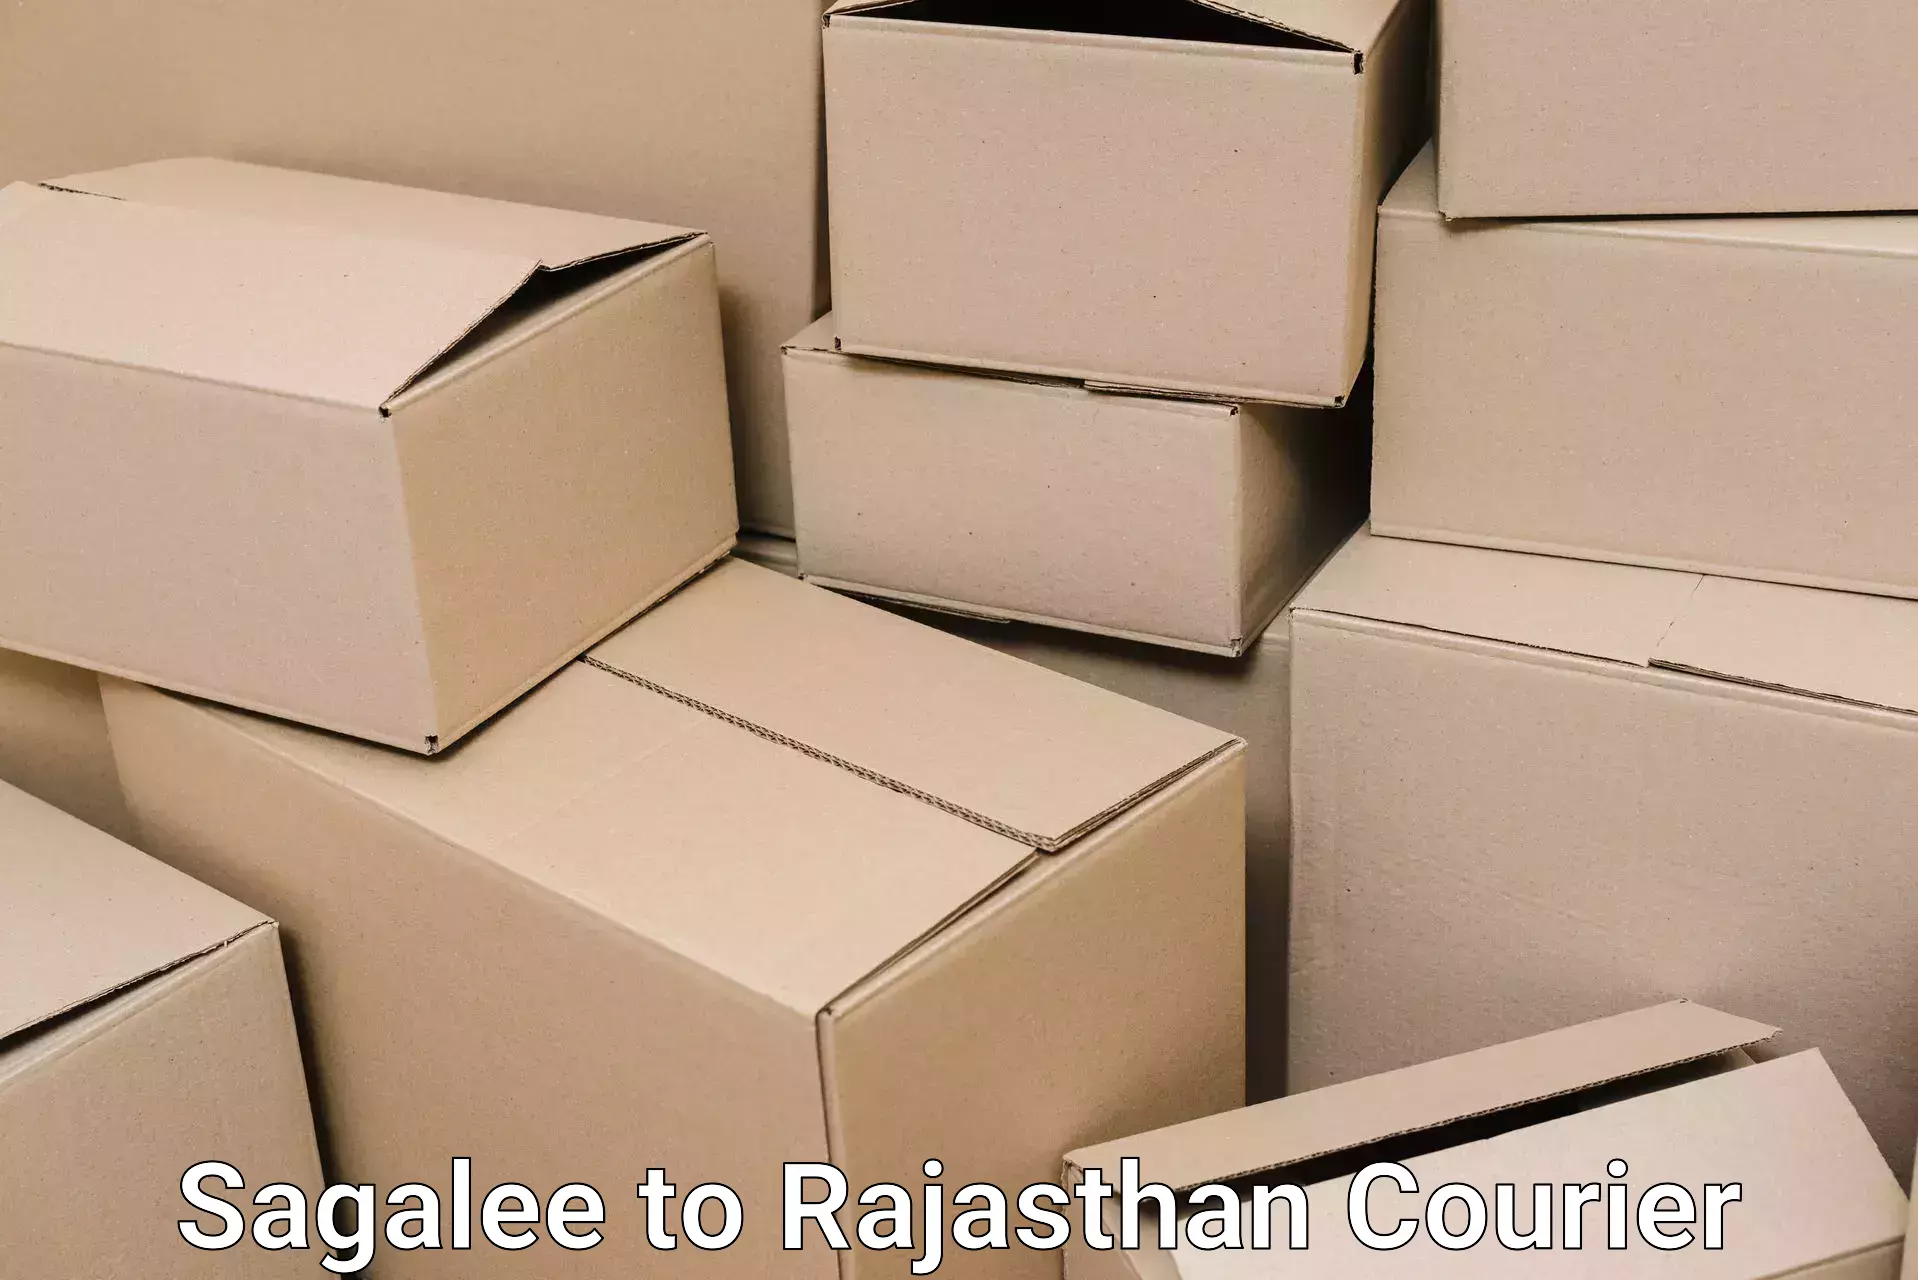 Quality moving company Sagalee to Rajasthan